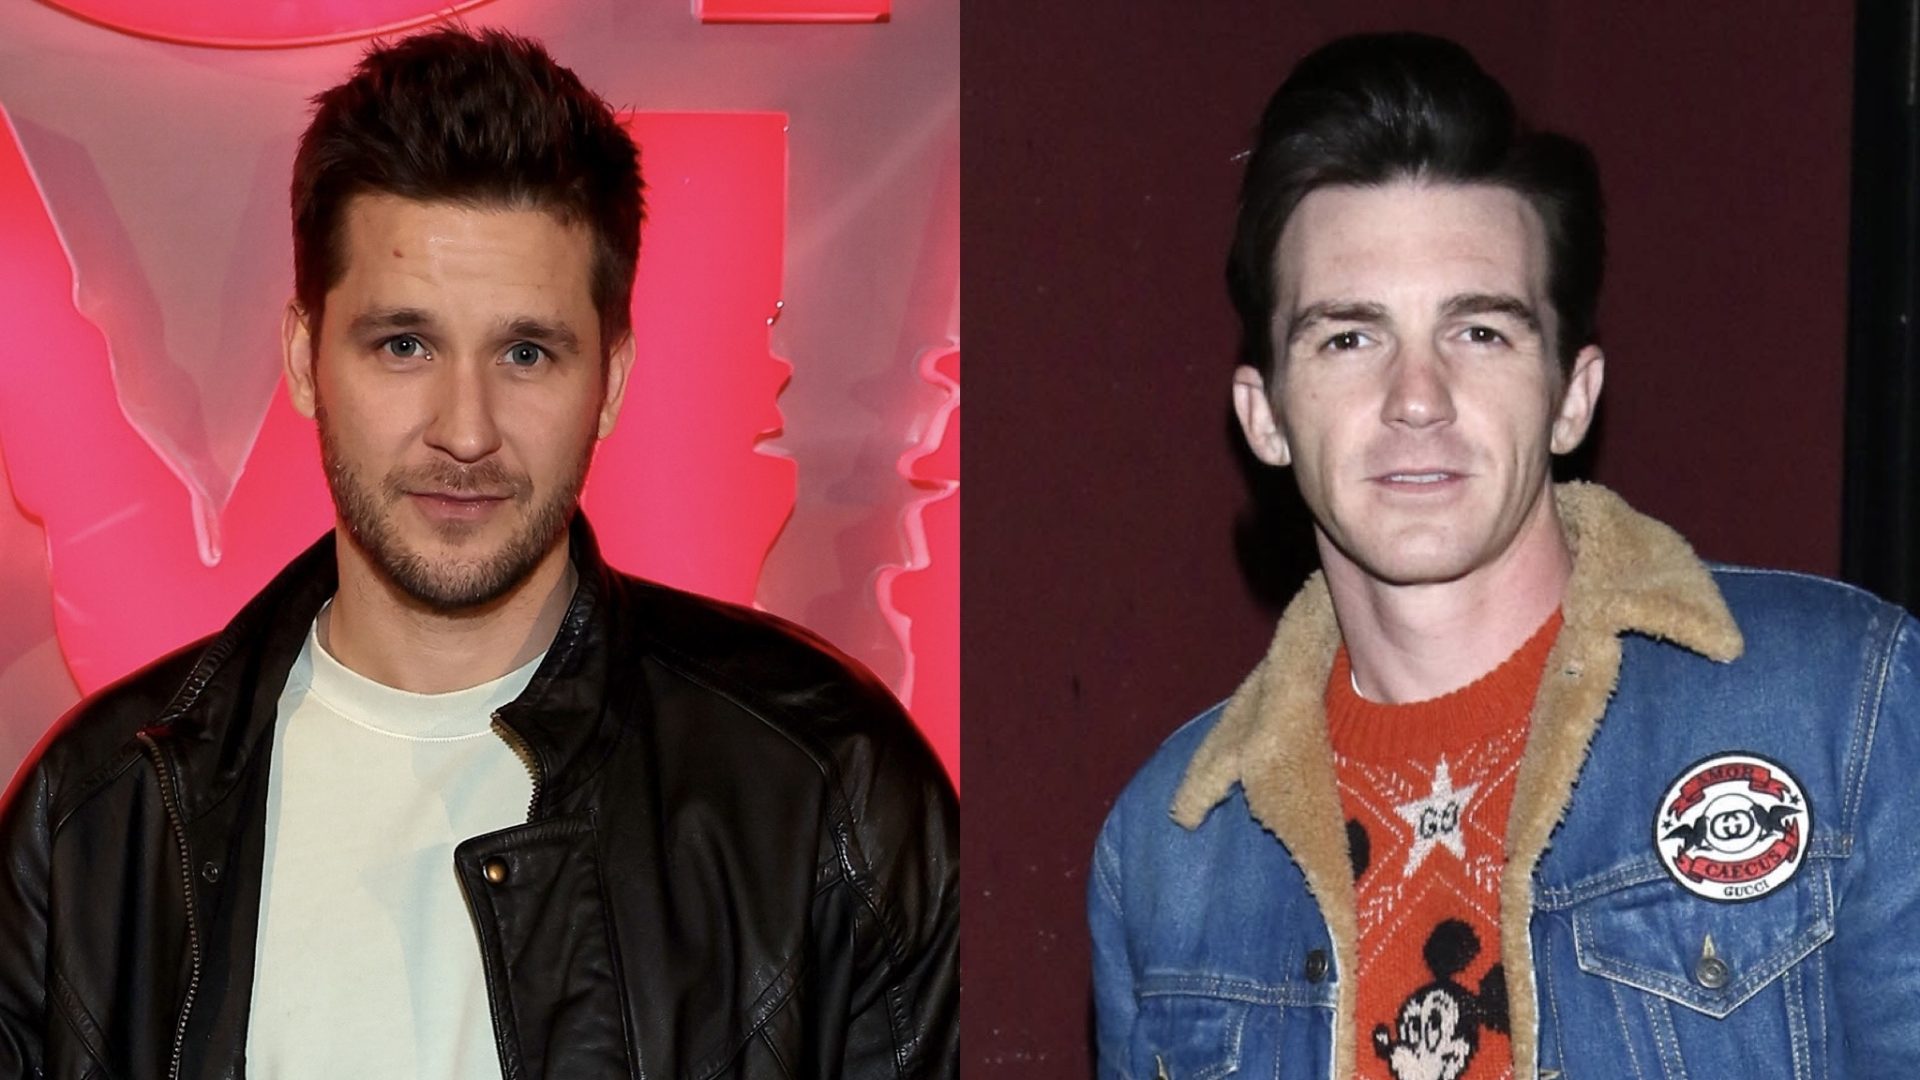 ‘Ned’s Declassified’ Star Shares Statement After Viral Video Showed Him Laughing While Speaking About Drake Bell’s Sexual Assault thumbnail